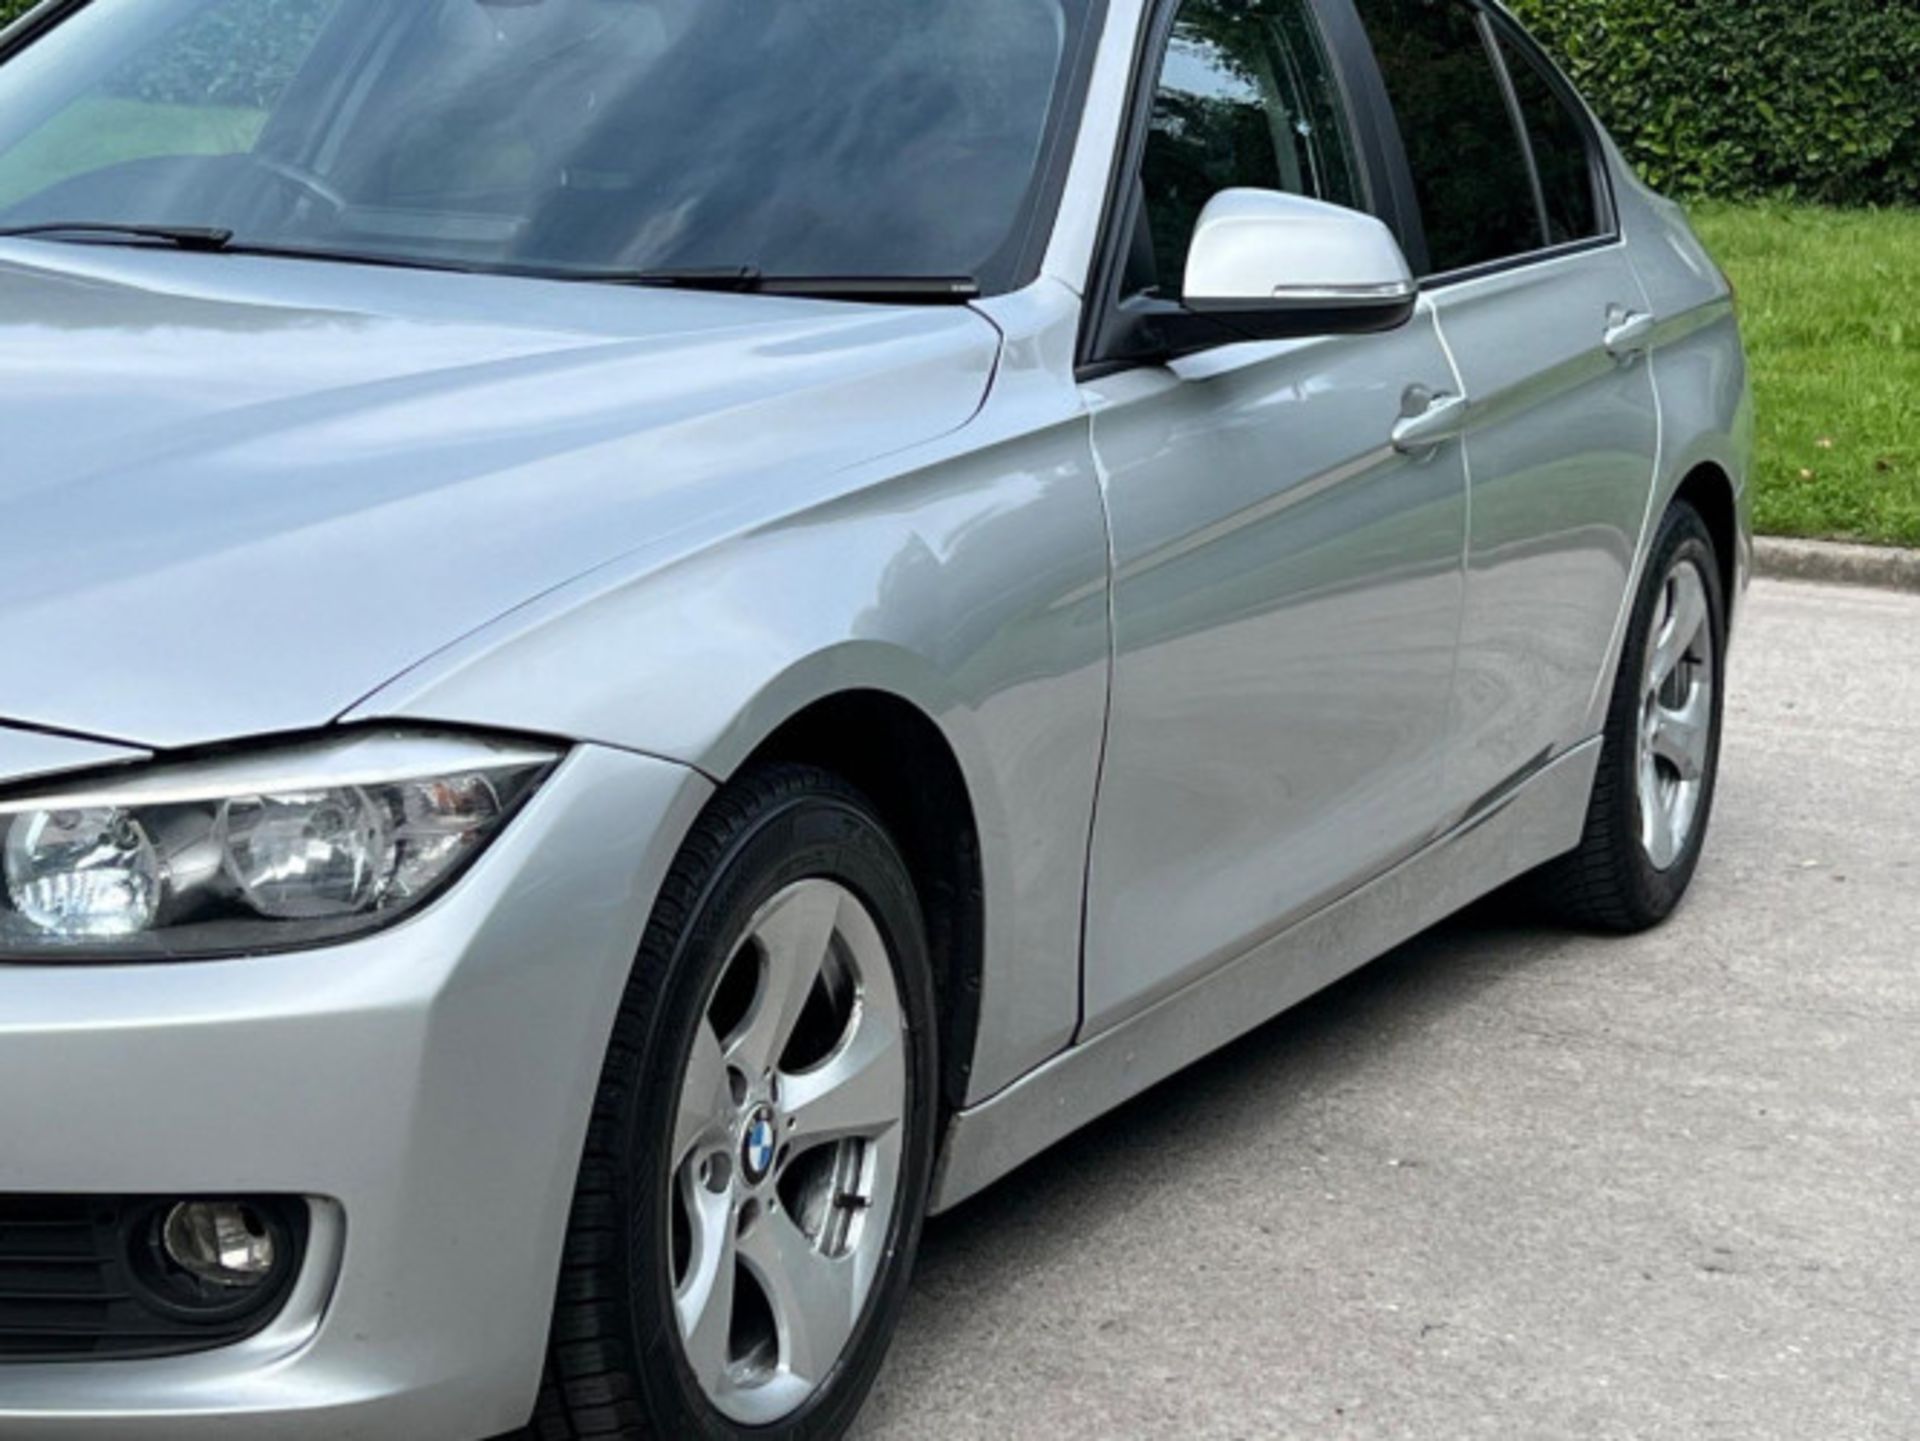 BMW 3 SERIES 2.0 DIESEL ED START STOP - A WELL-MAINTAINED GEM >>--NO VAT ON HAMMER--<< - Image 216 of 229